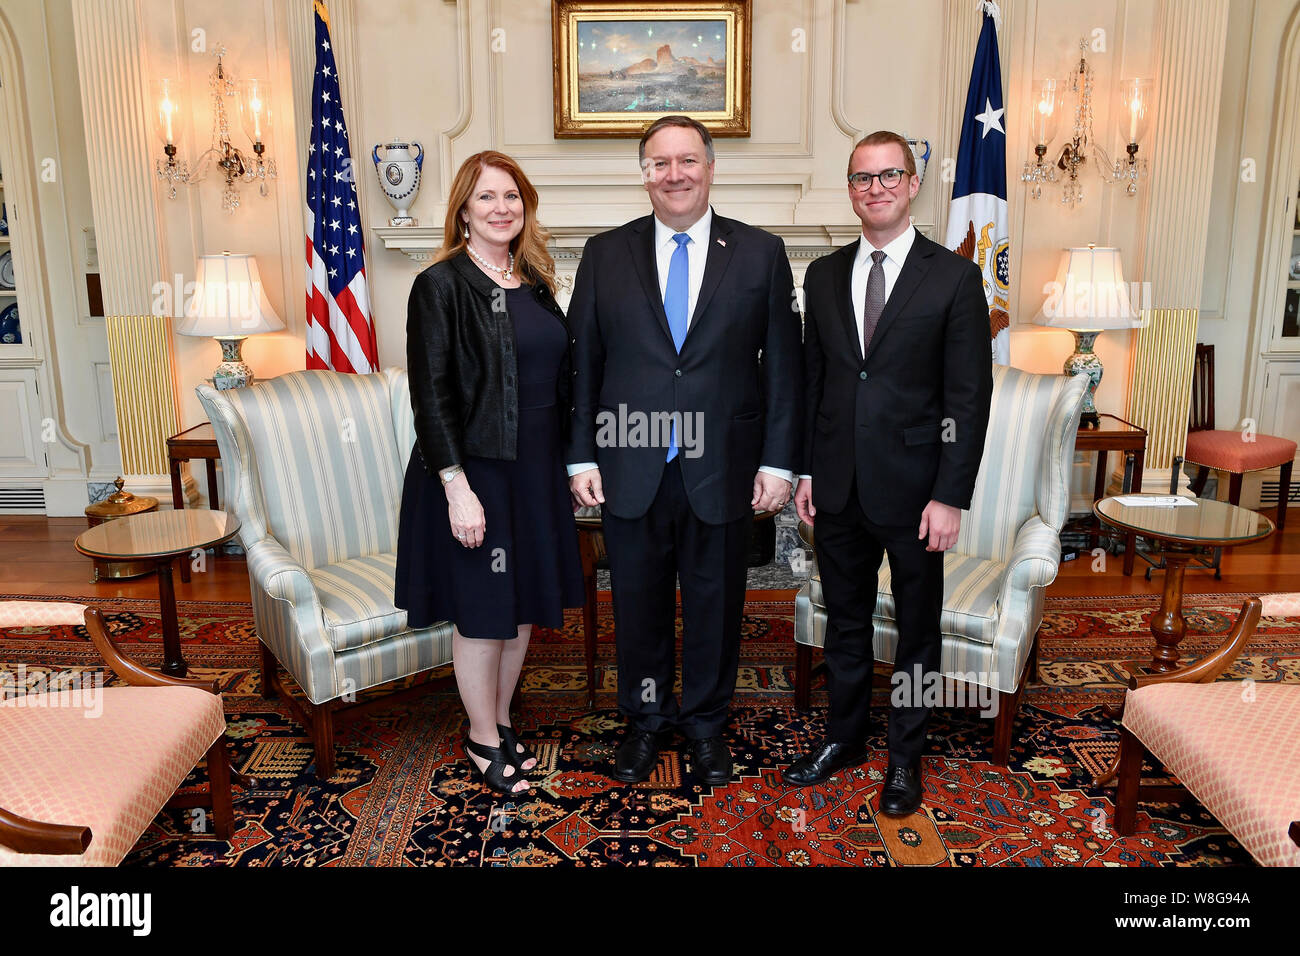 U.S. Secretary of State Mike Pompeo poses for a photo with his wife Susan and son Nicholas in his outer office at the U.S. Department of State in Wash Stock Photo